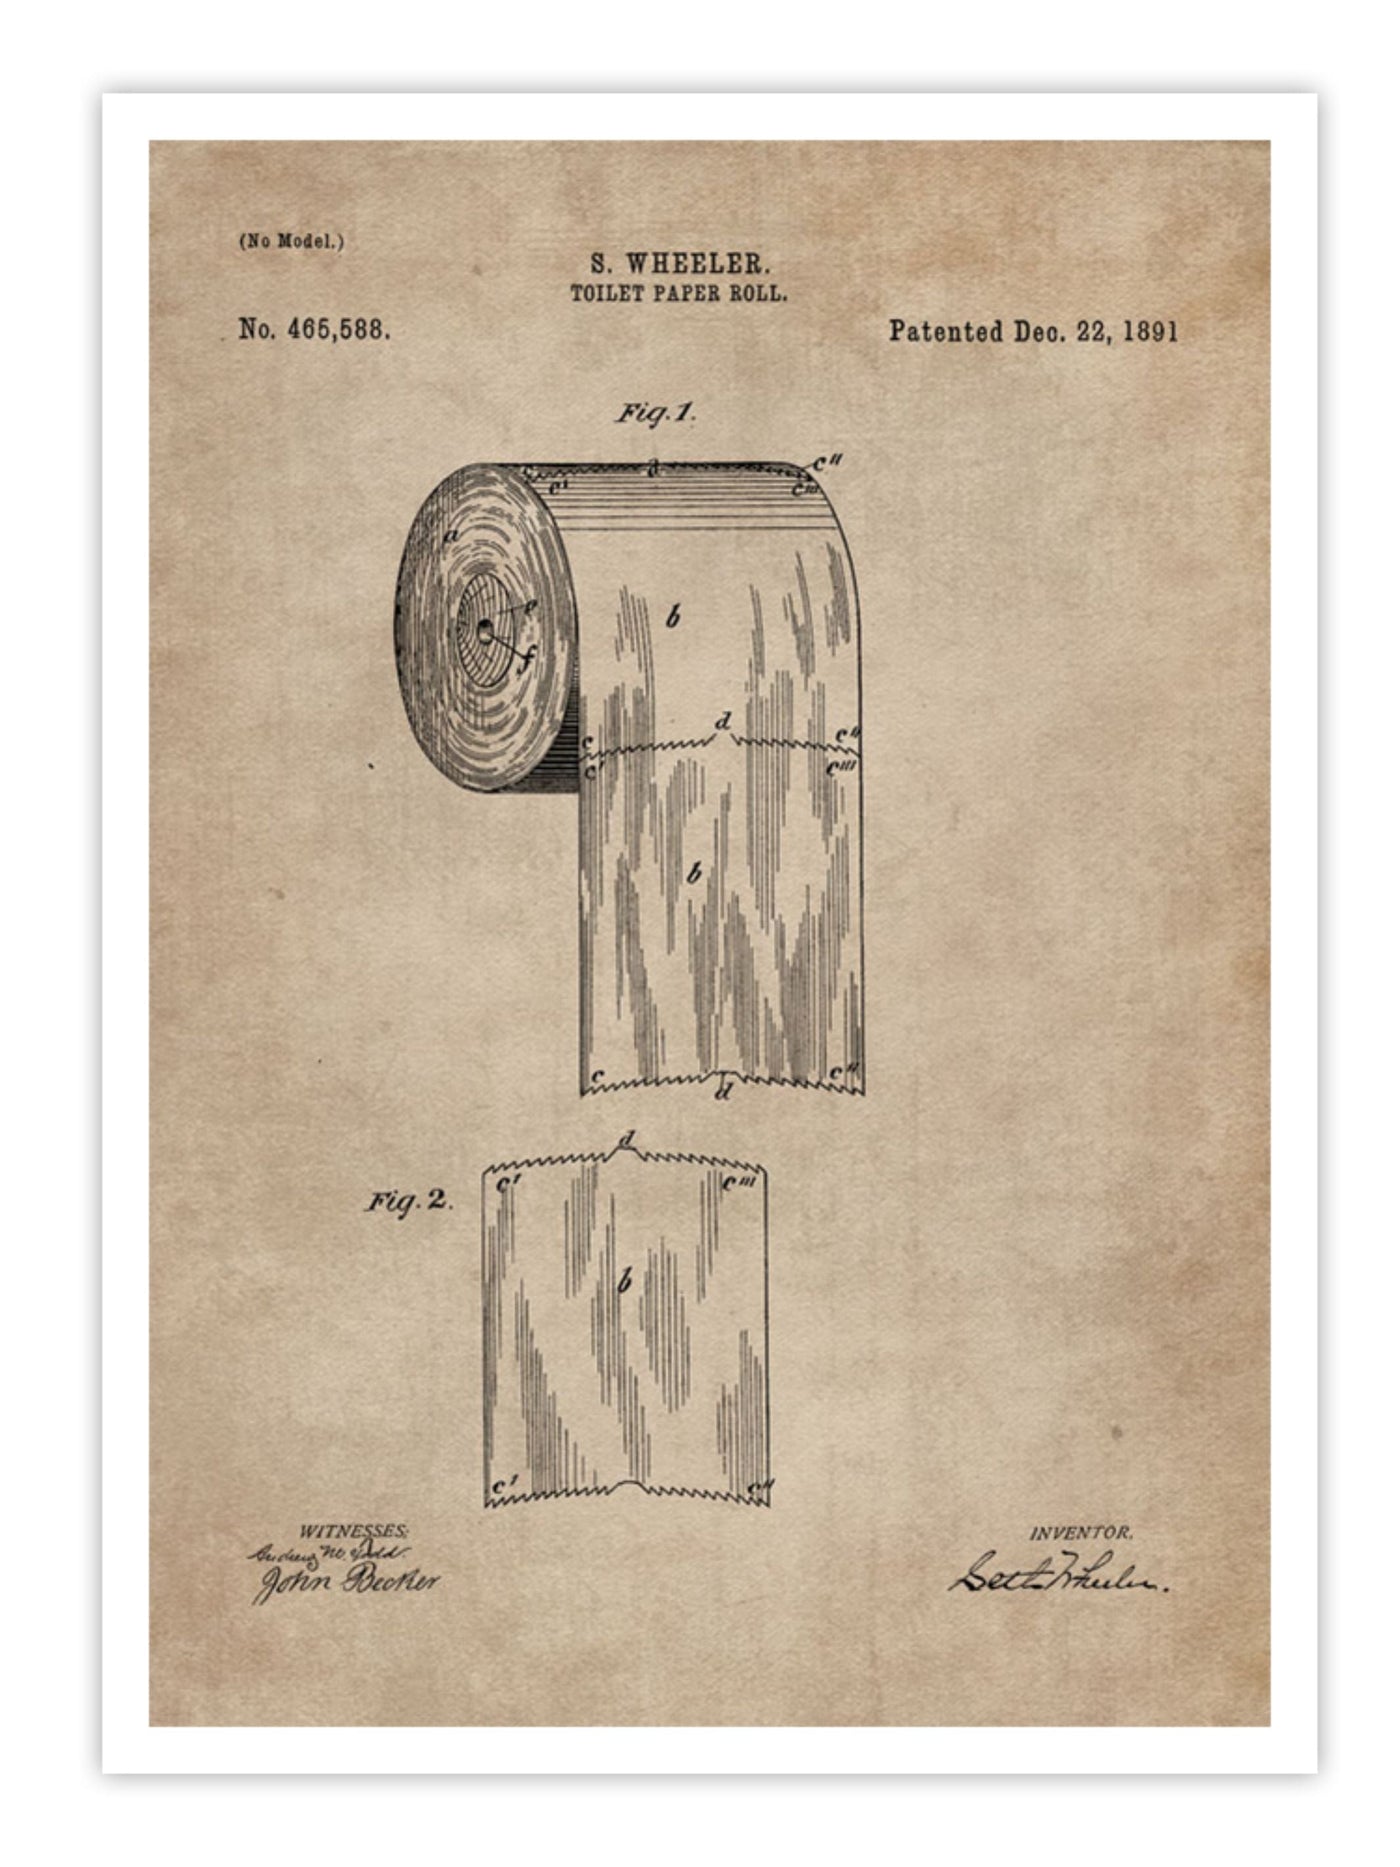 Patent Document of a Toilet Paper Roll Wall Prints